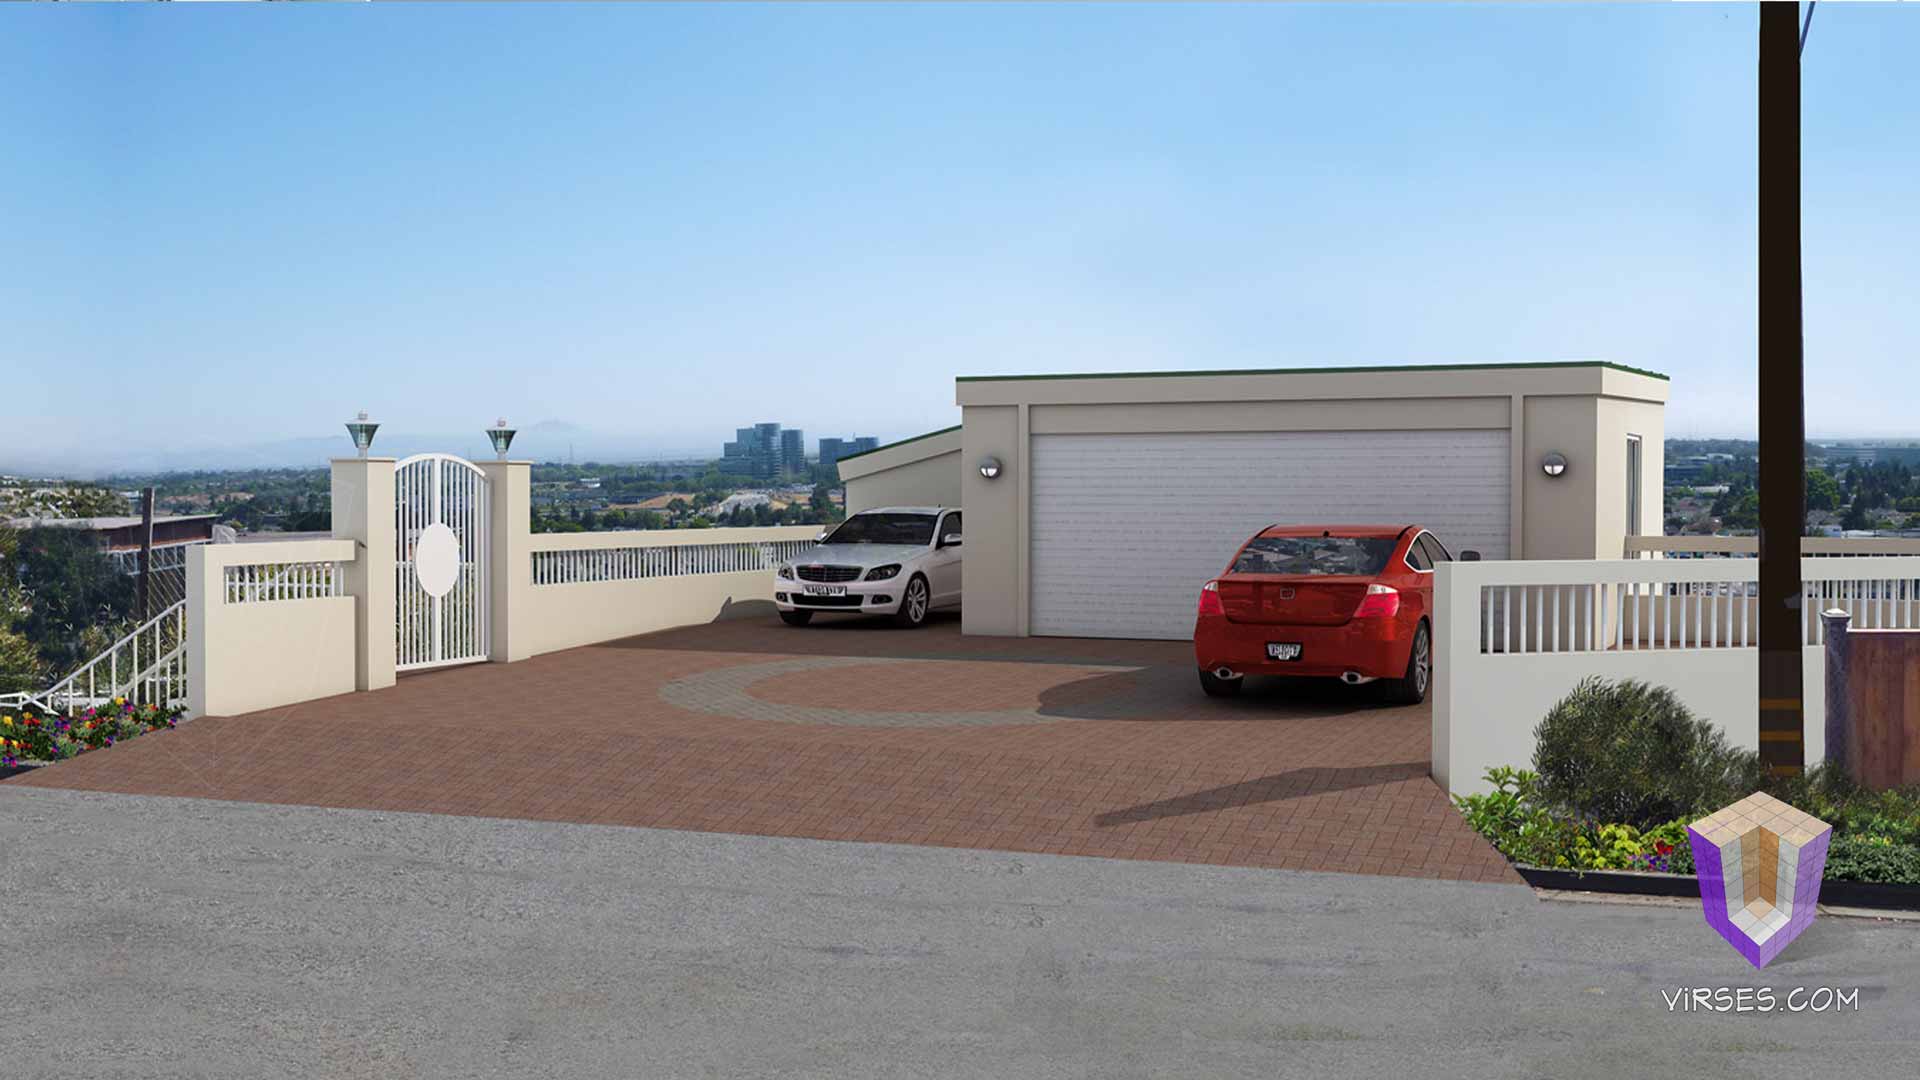 Driveway Addition and Renovation 3D Rendering